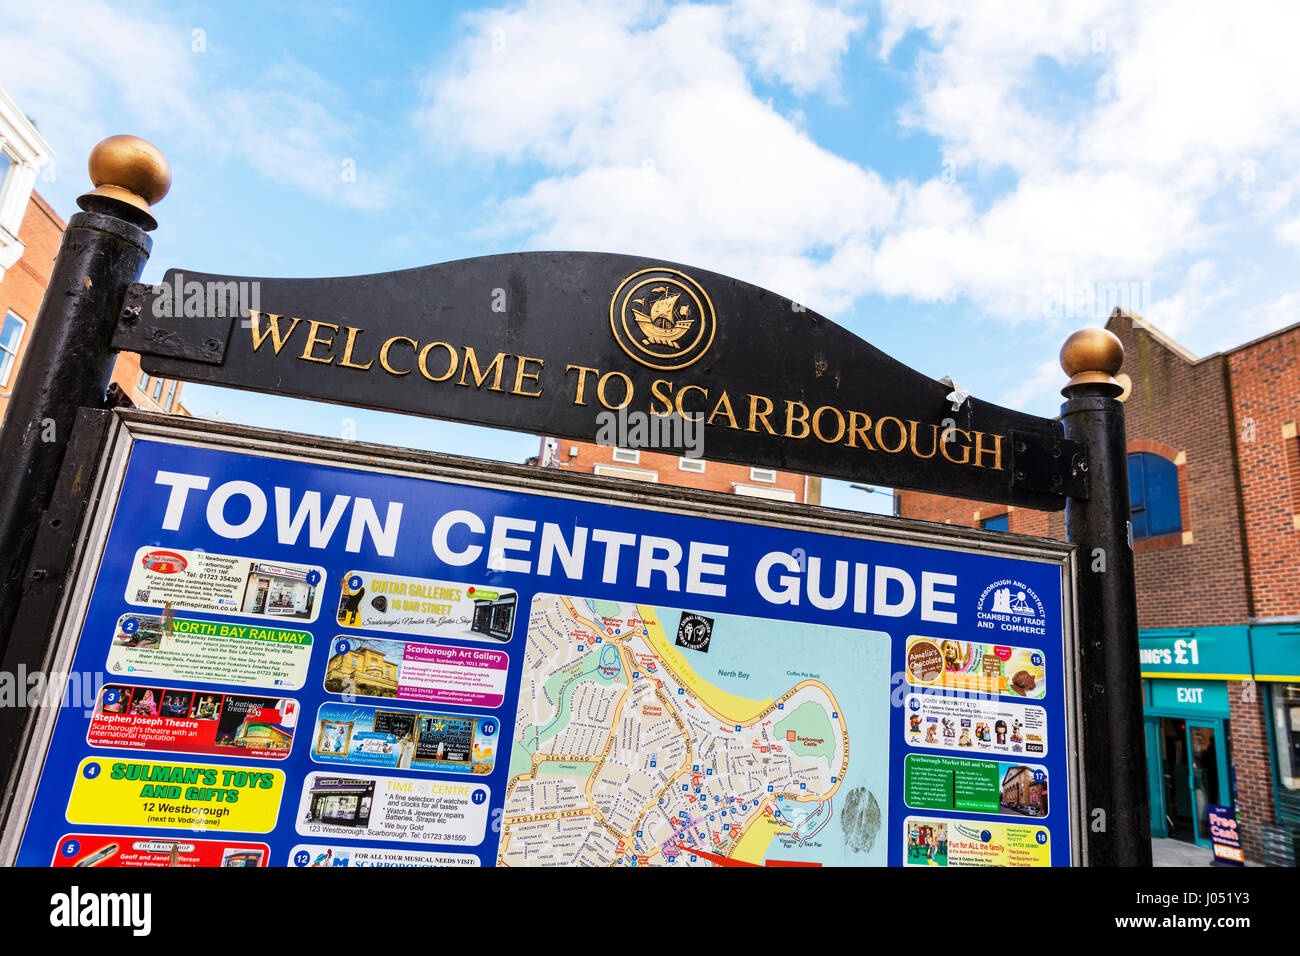 Welcome to Scarborough sign UK England Scarborough town centre guide map board Stock Photo